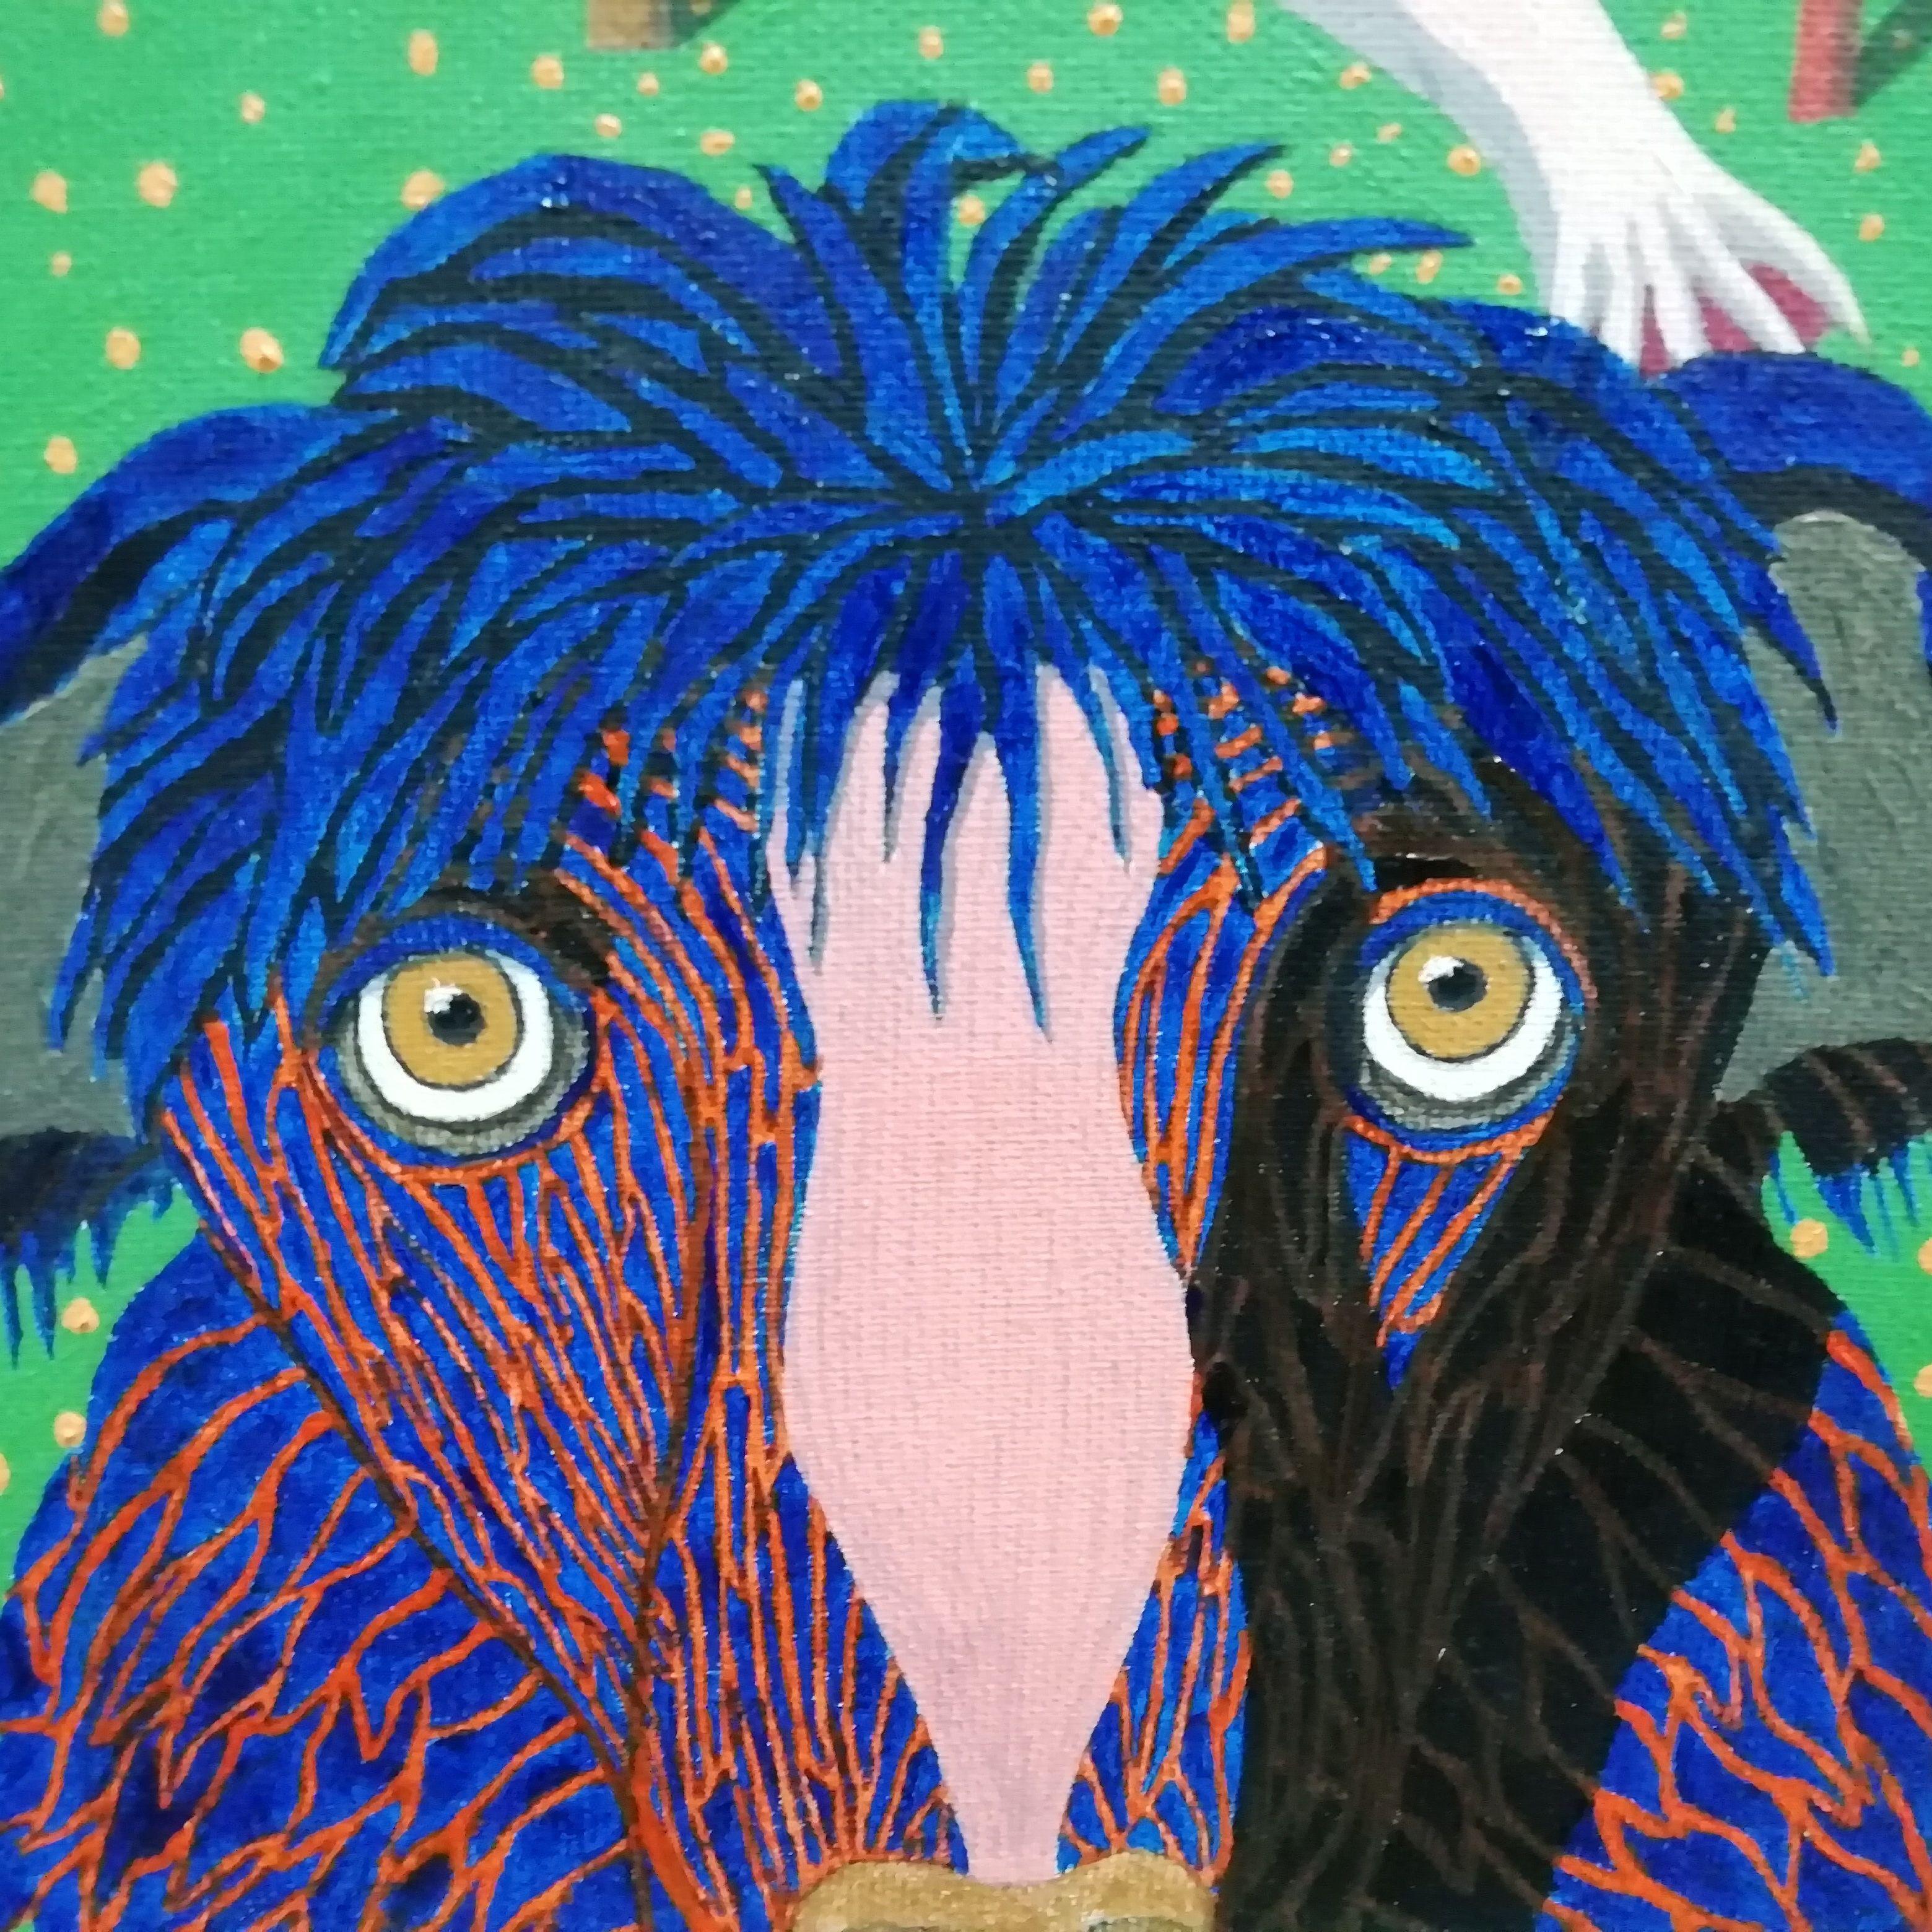 This painting is inspired by a song of the same title by the band Belako. The dog is a personal vision of our pet Pongo. :: Painting :: Surrealism :: This piece comes with an official certificate of authenticity signed by the artist :: Ready to